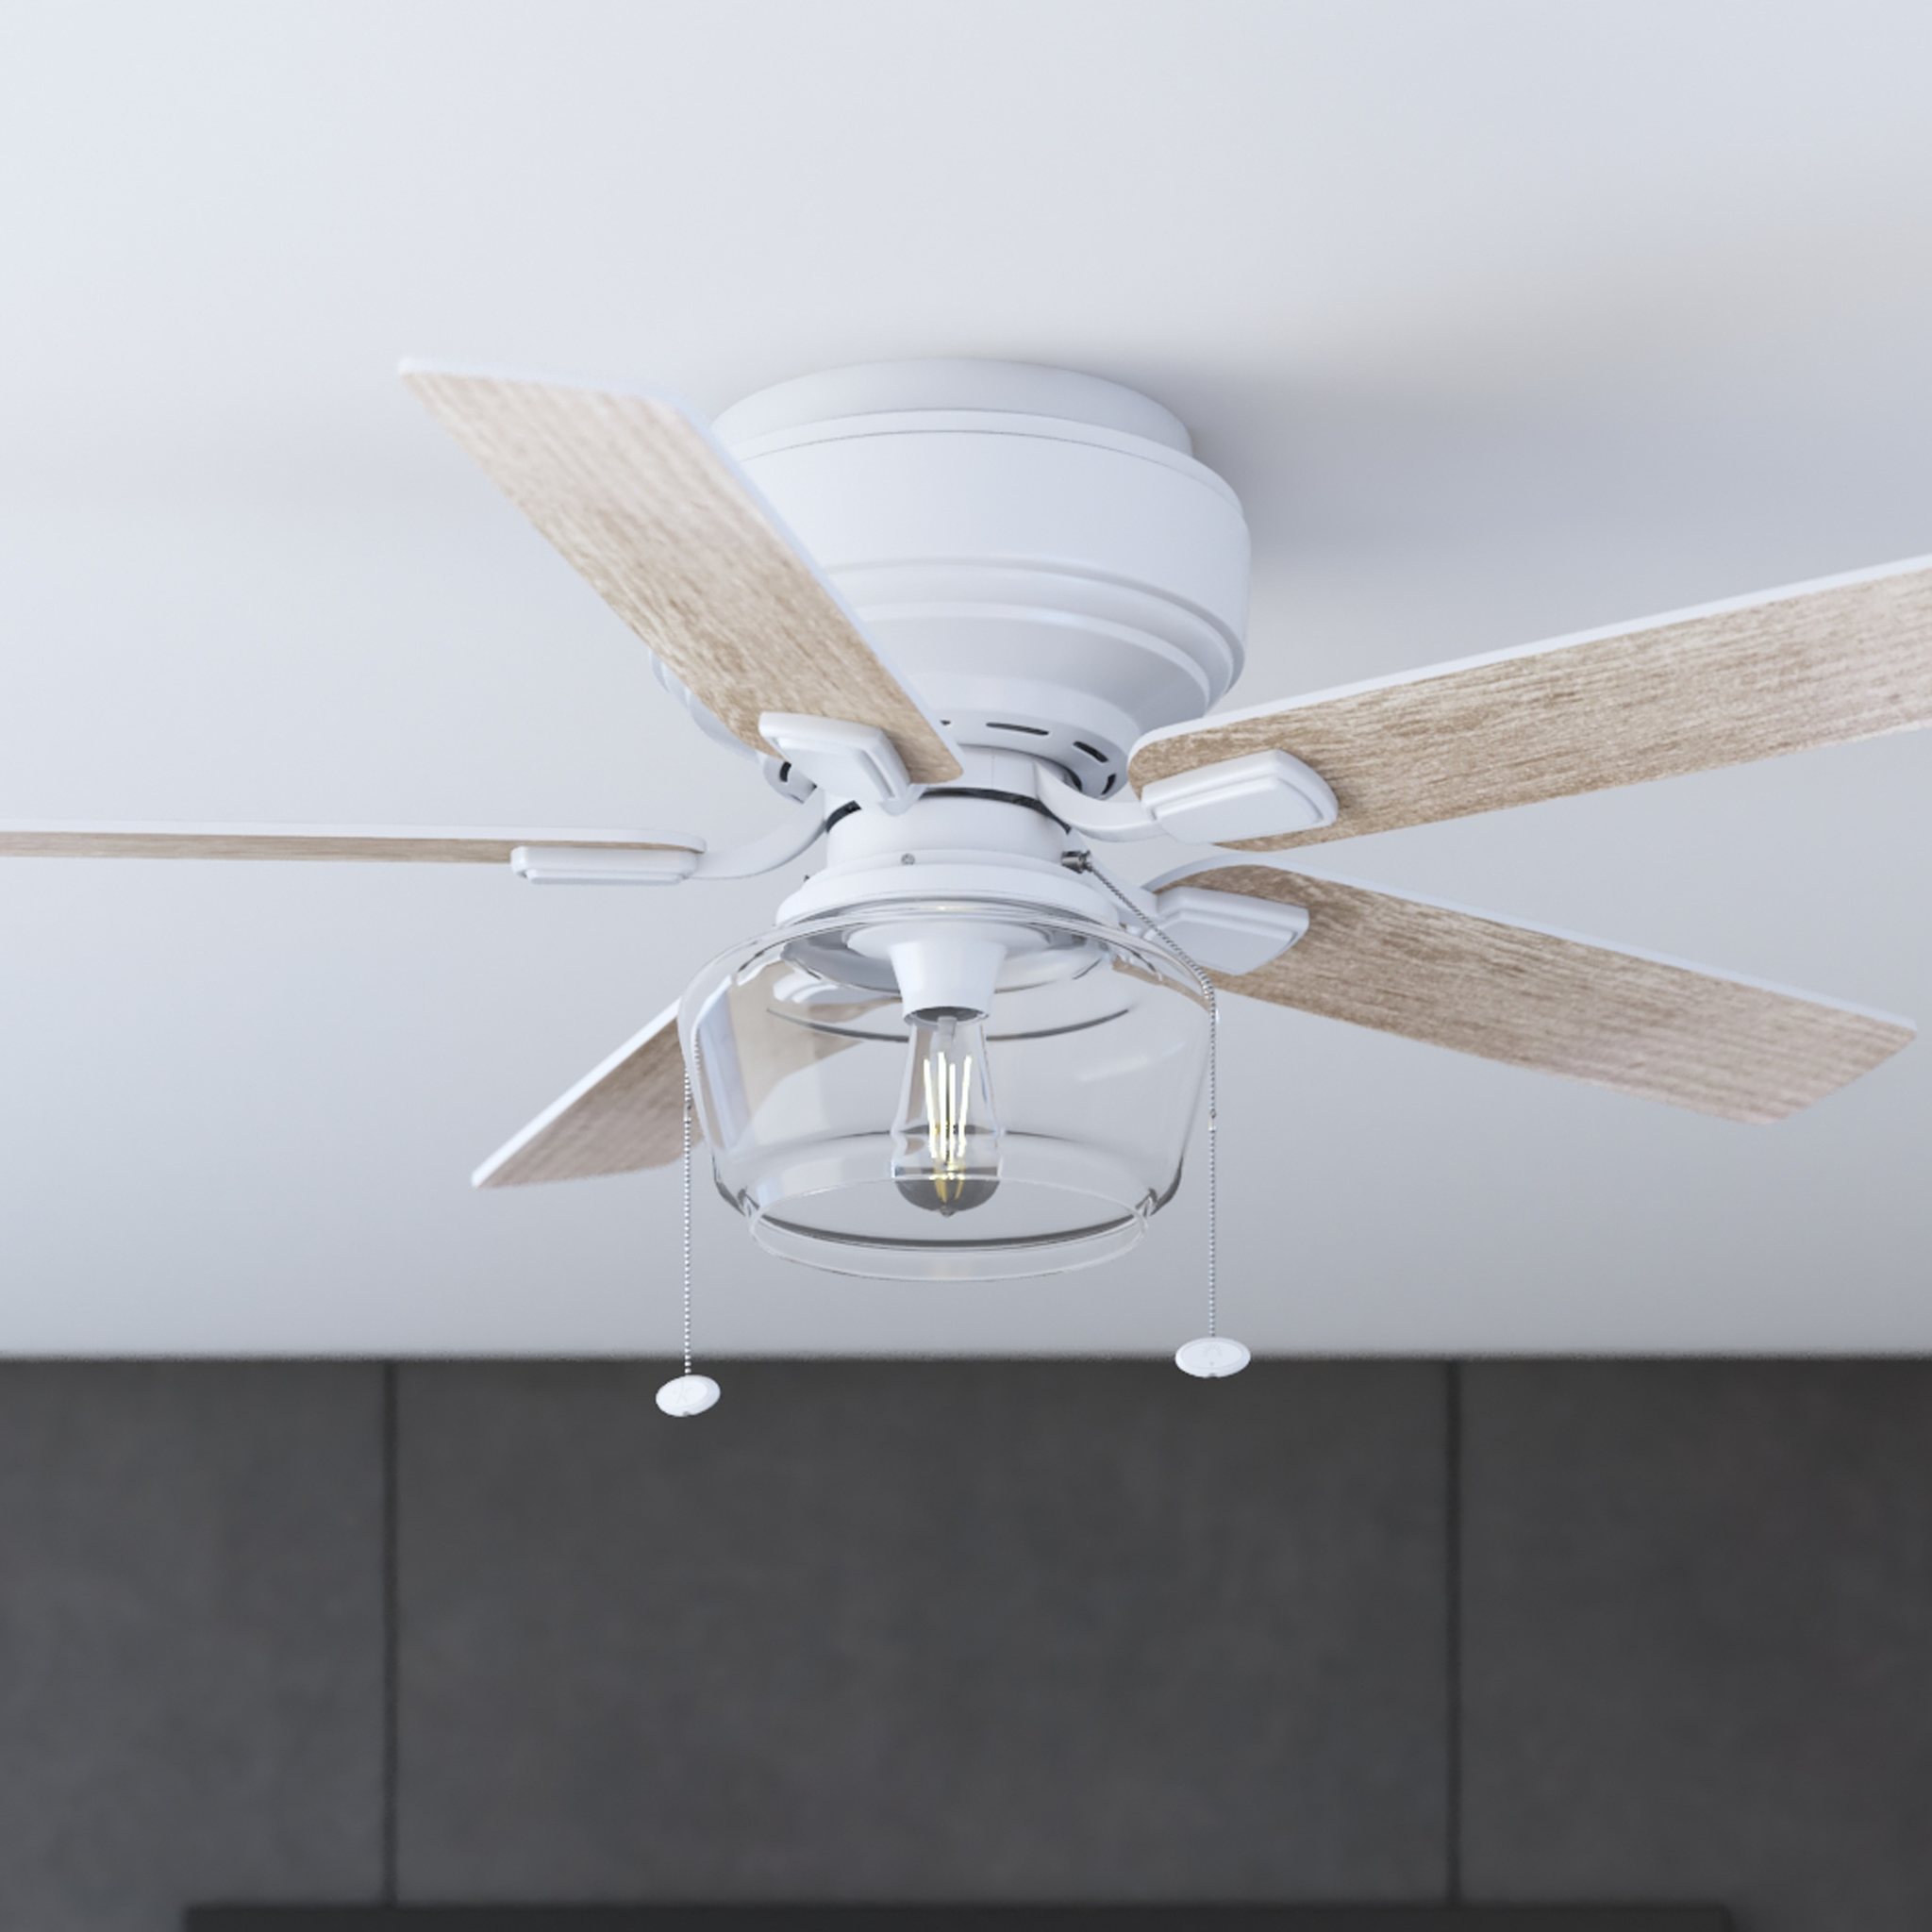 52 Inch MaCenna, White, Pull Chain, Ceiling Fan by Prominence Home